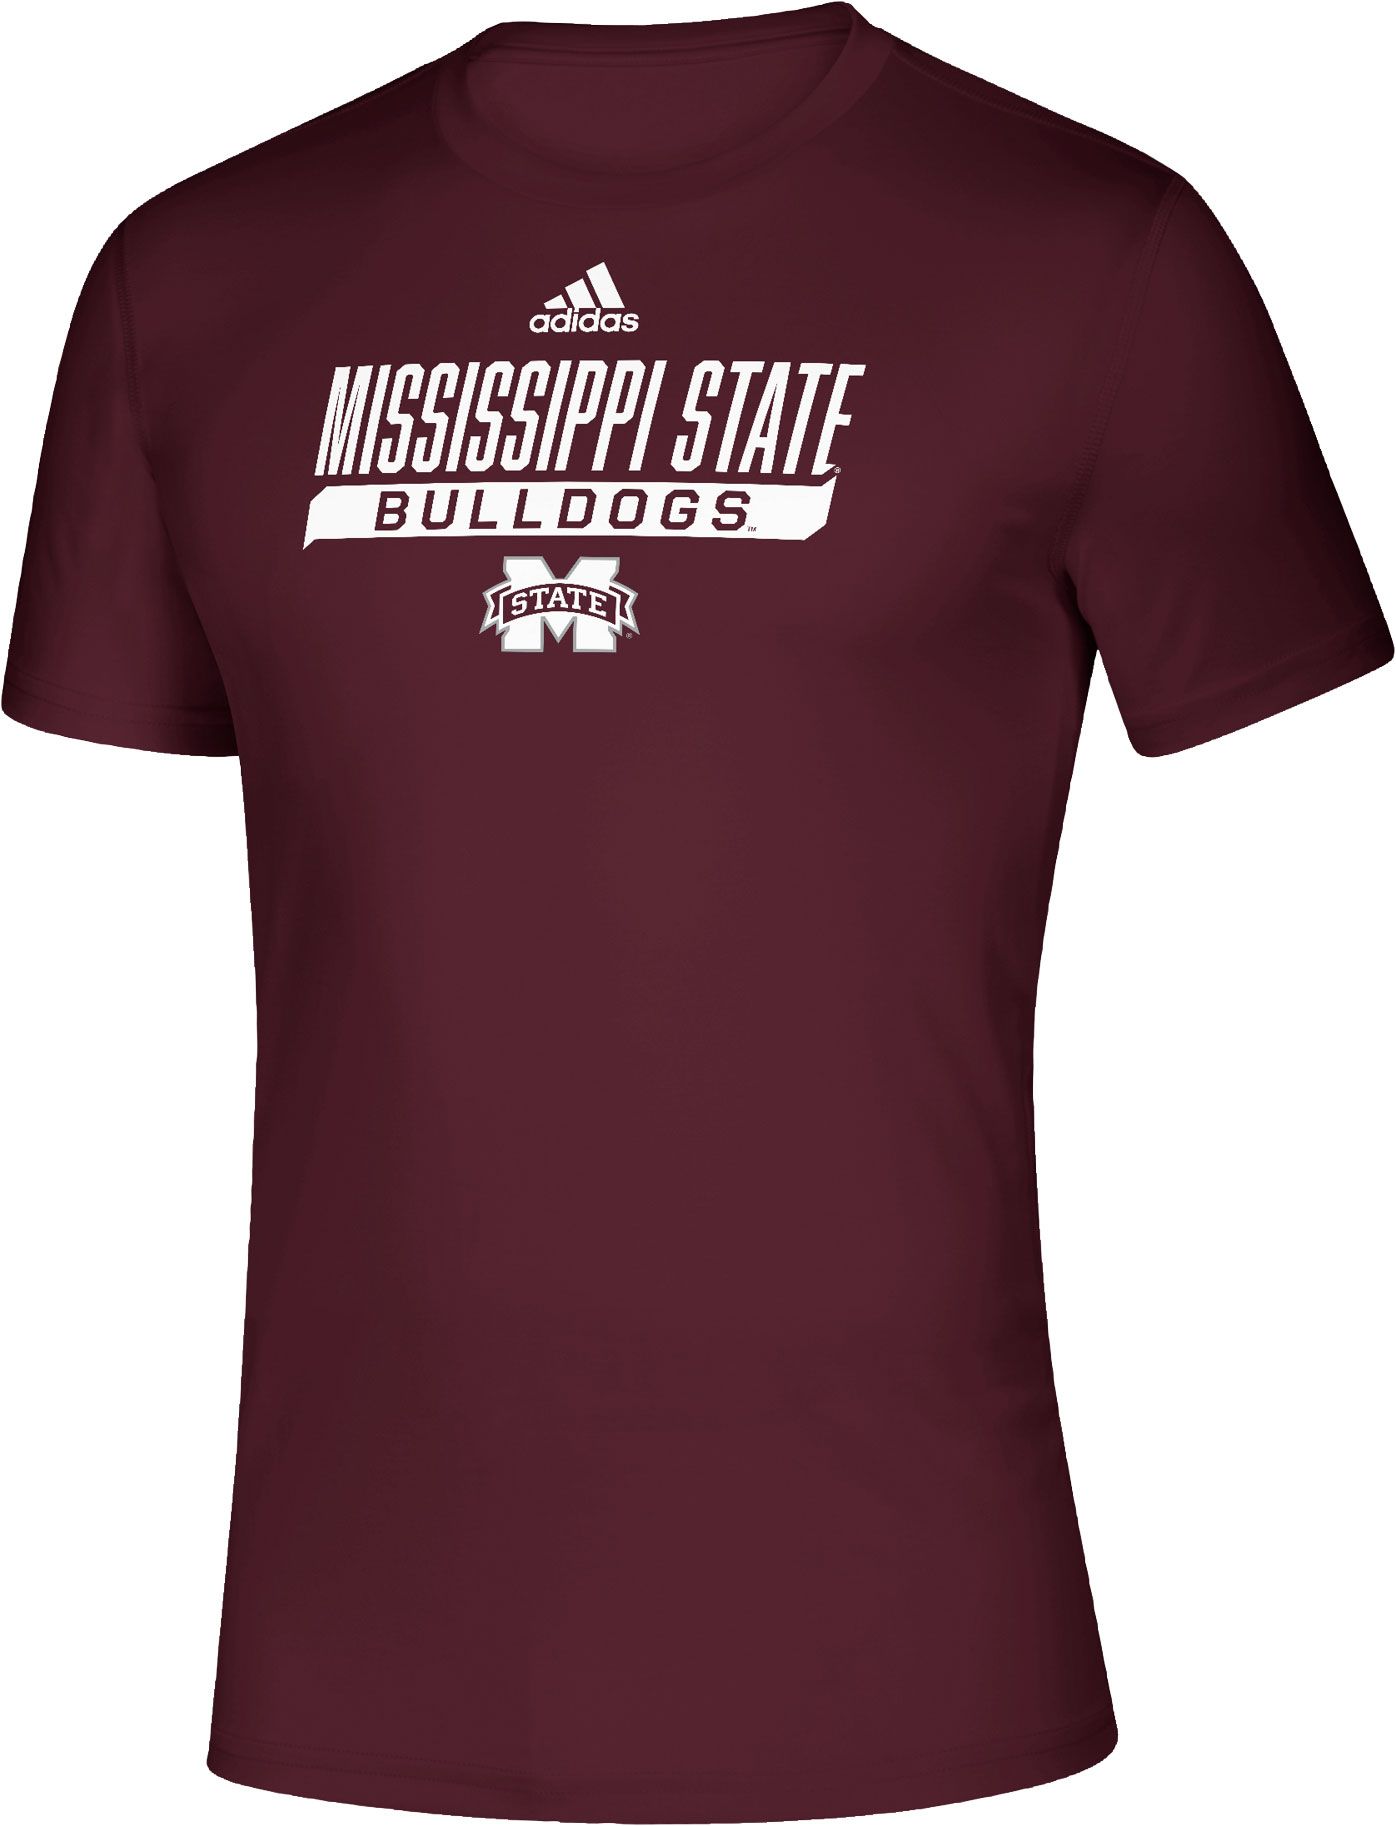 mississippi state adidas apparel